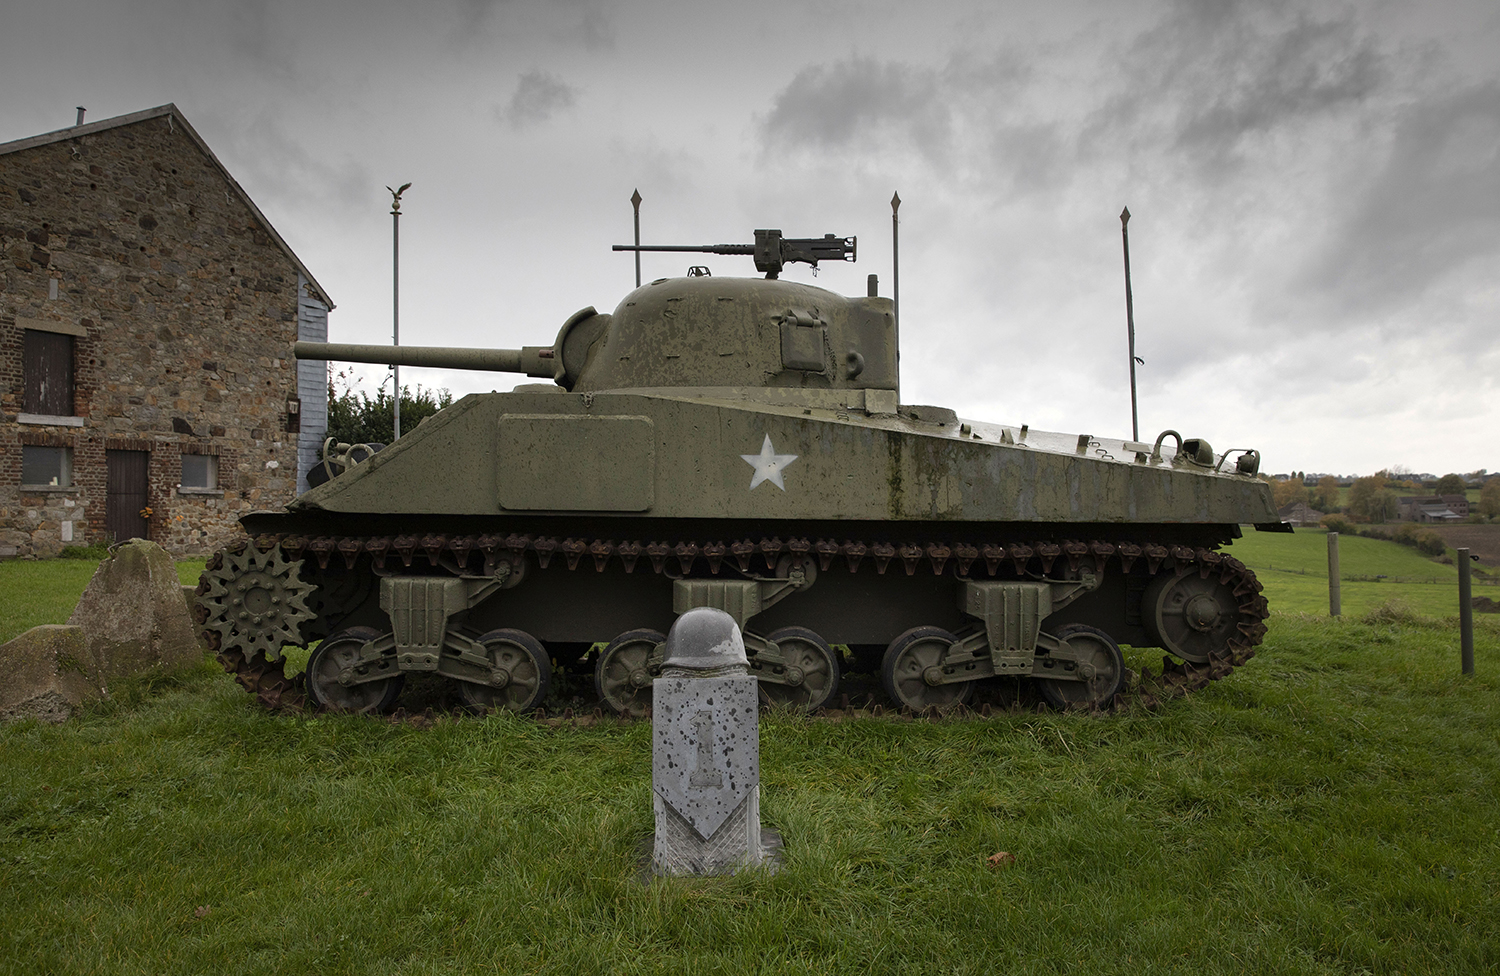 Ever wanted to drive a WWII-era tank? Here's your chance